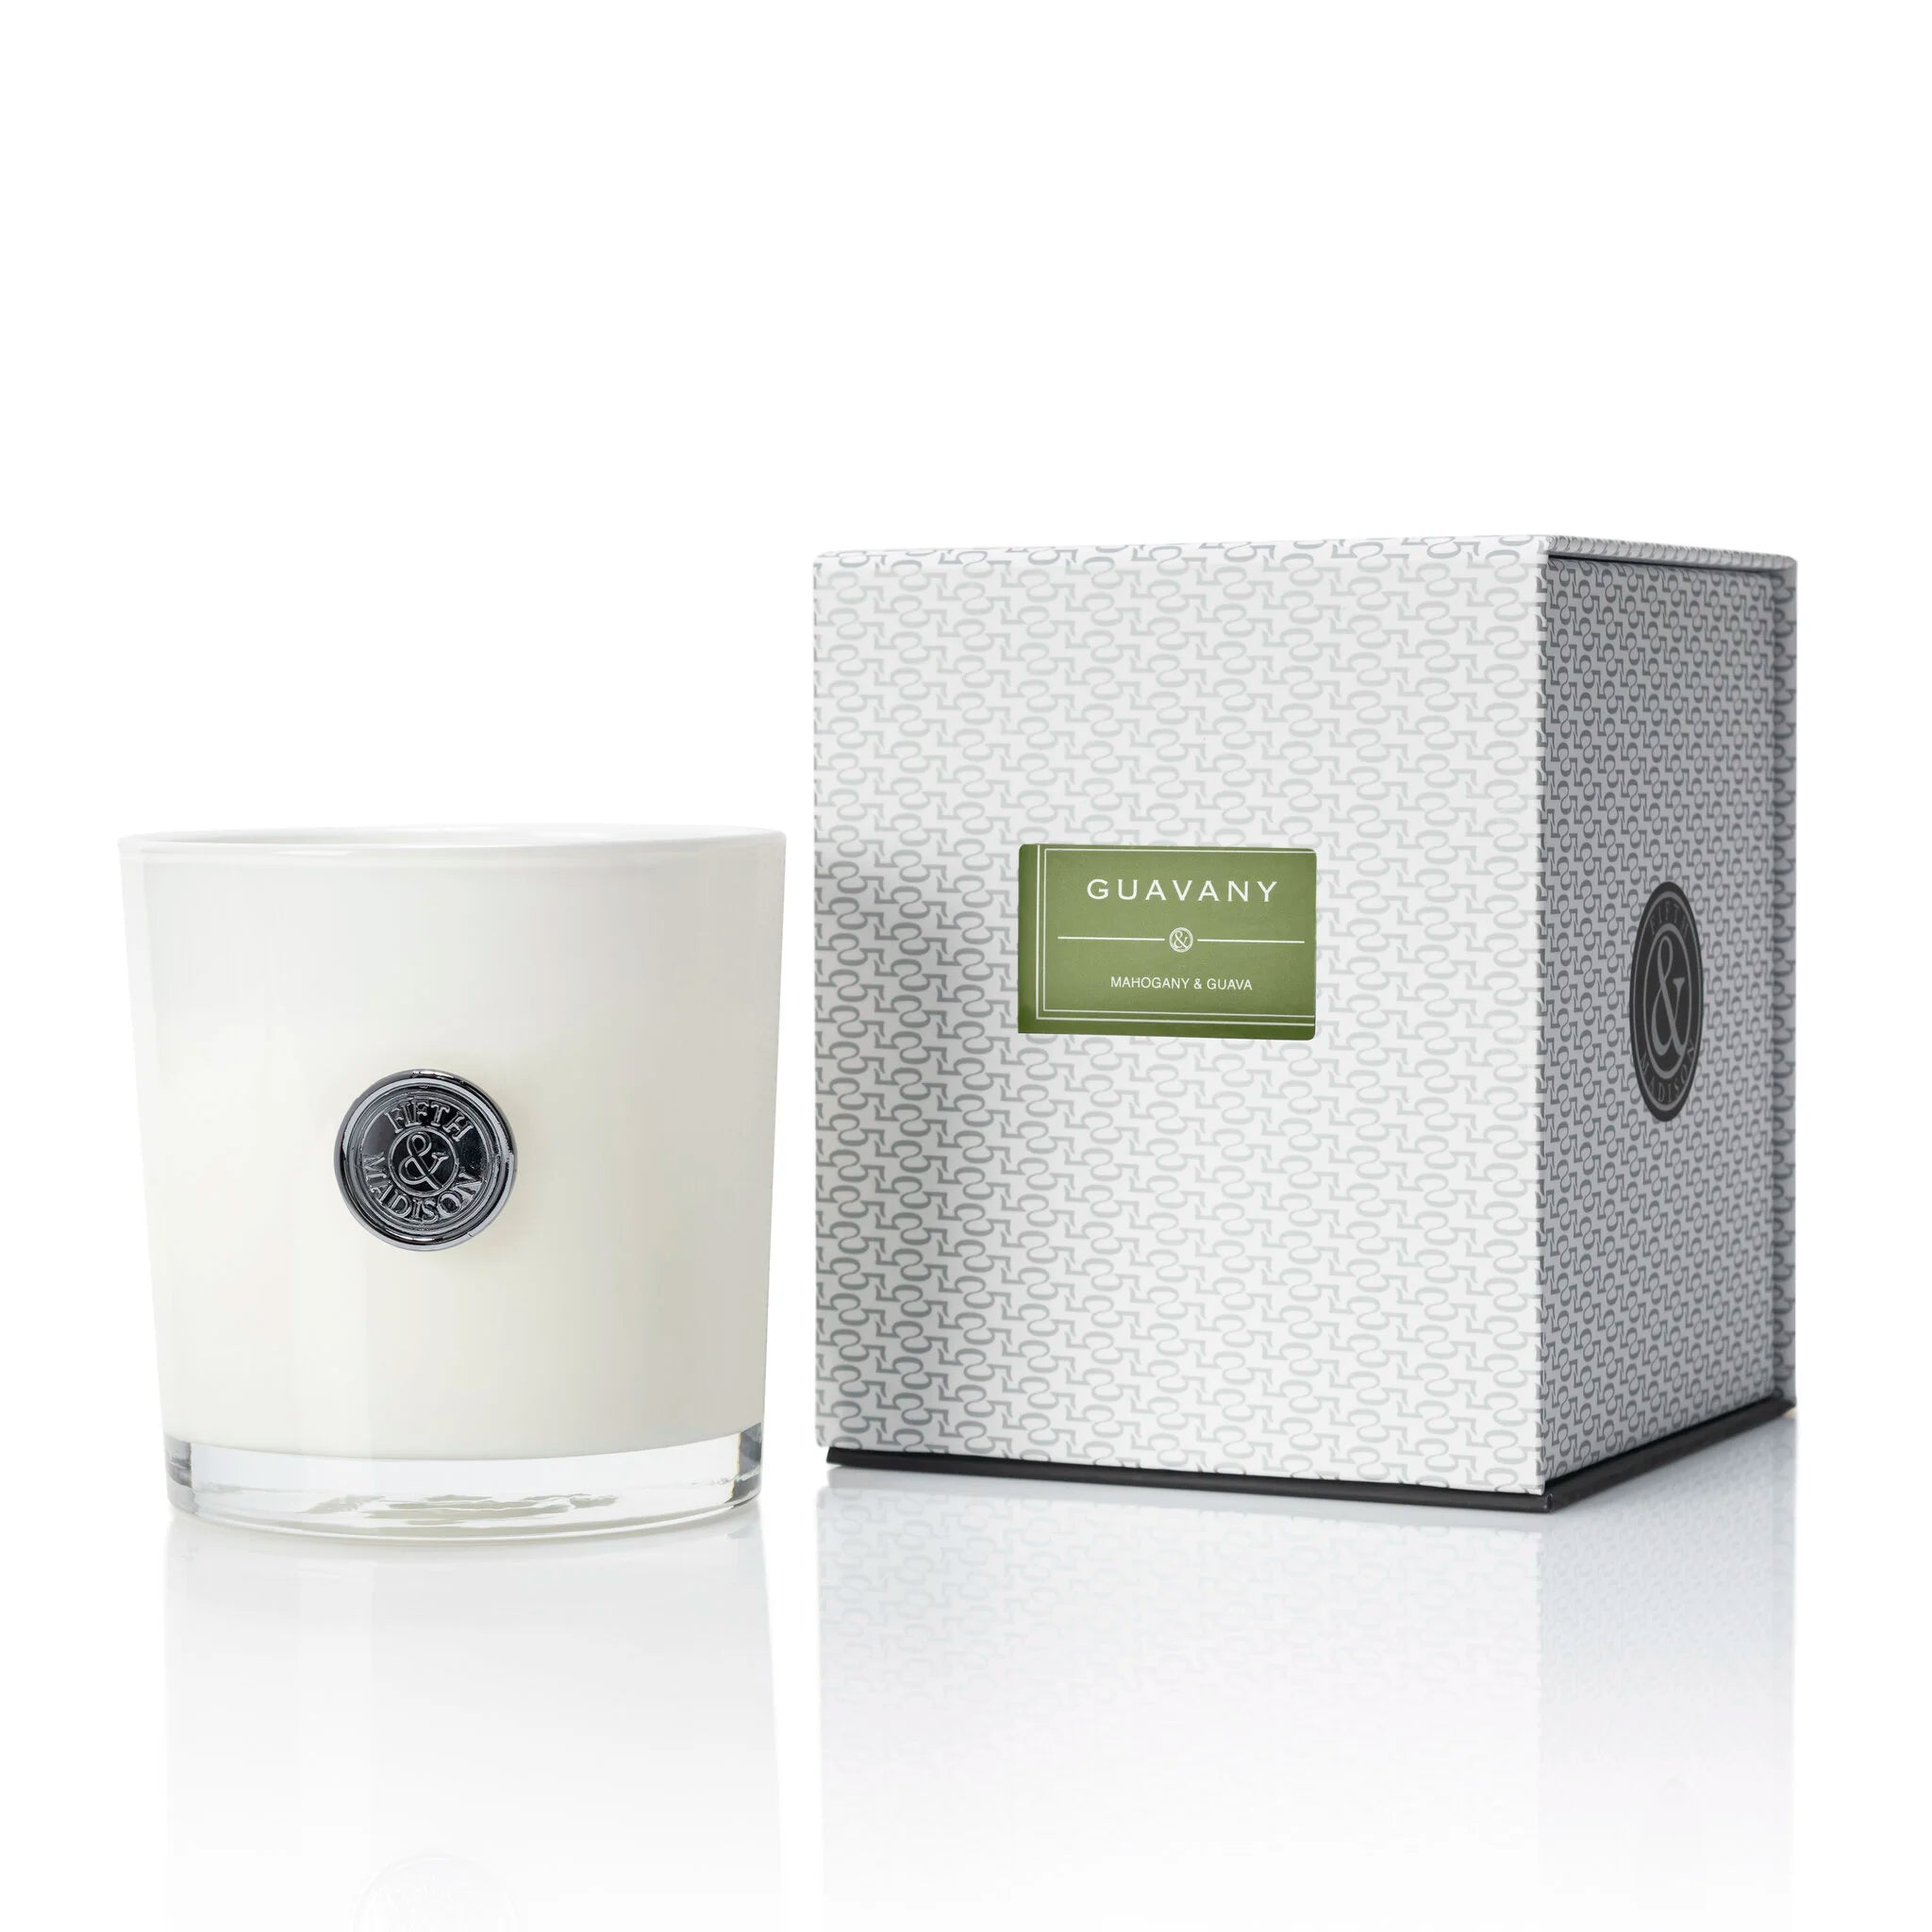 Guavany Soho Double Wick Candle